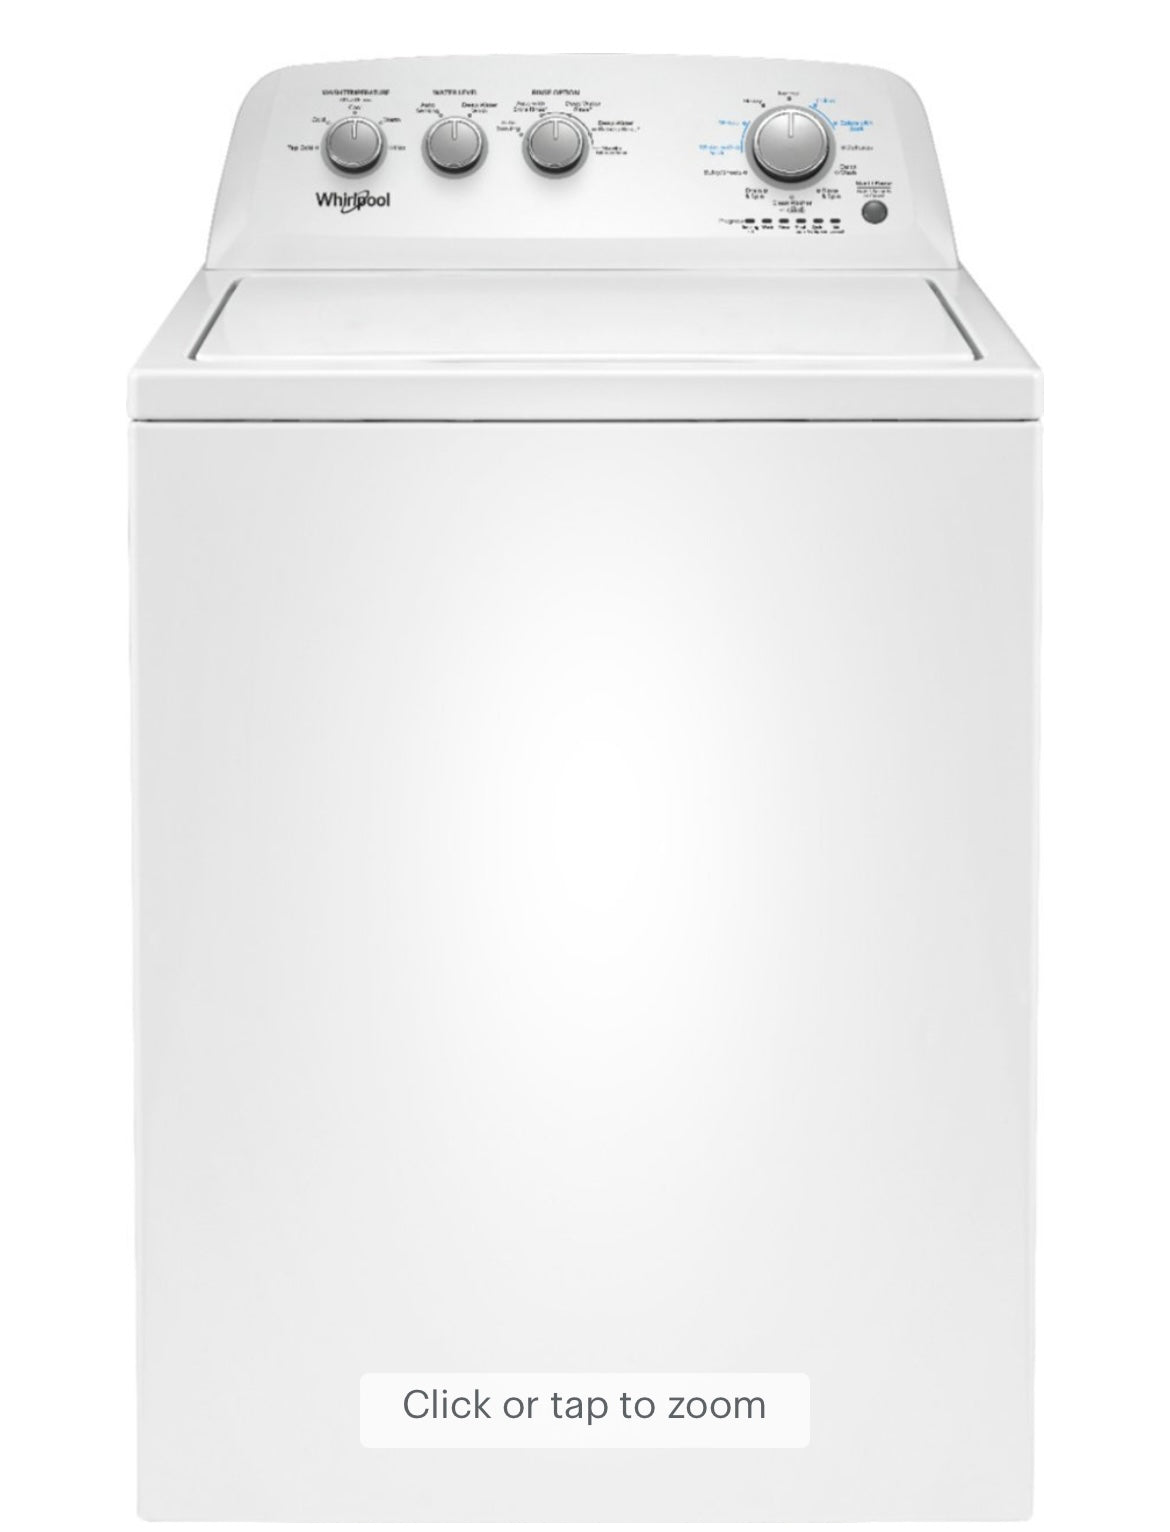 Whirlpool - 3.8 Cu. Ft. 12-Cycle Top-Loading Washer - White